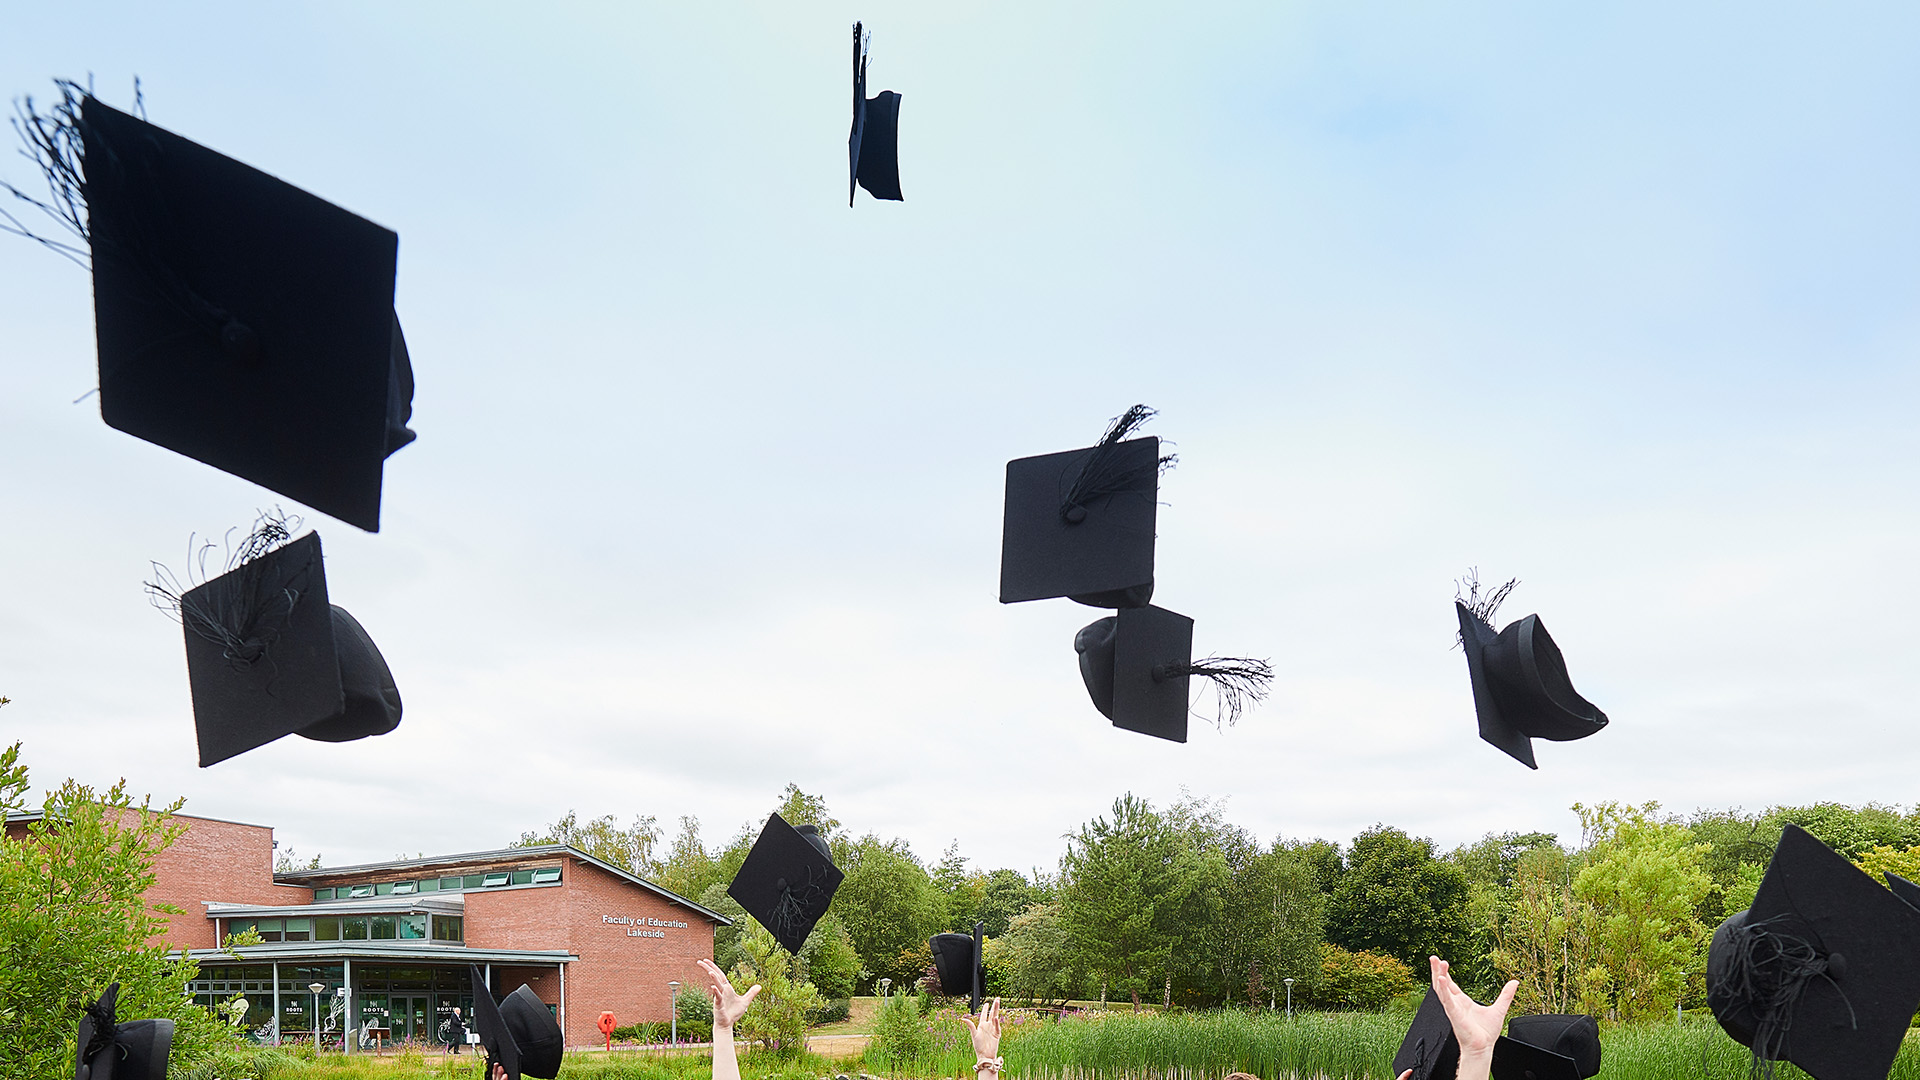 graduation hats being thrown in the air. summer blue sky